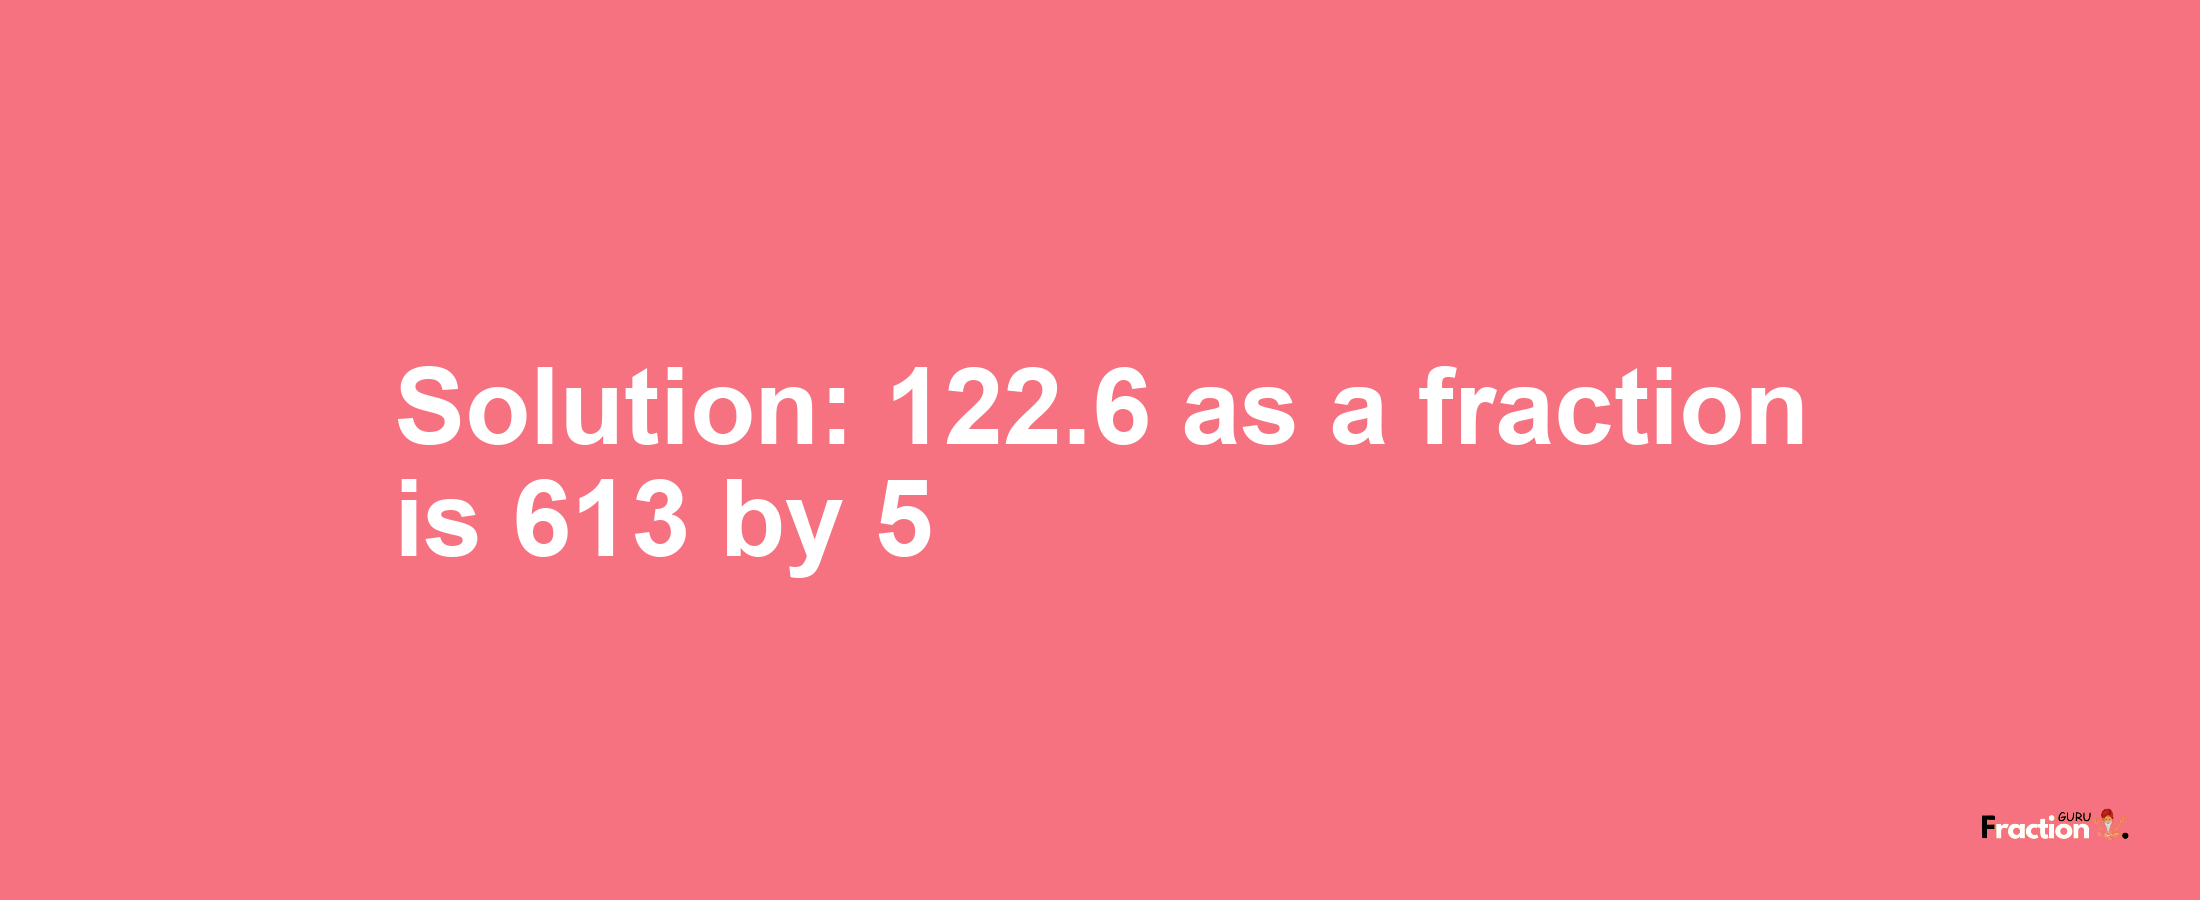 Solution:122.6 as a fraction is 613/5